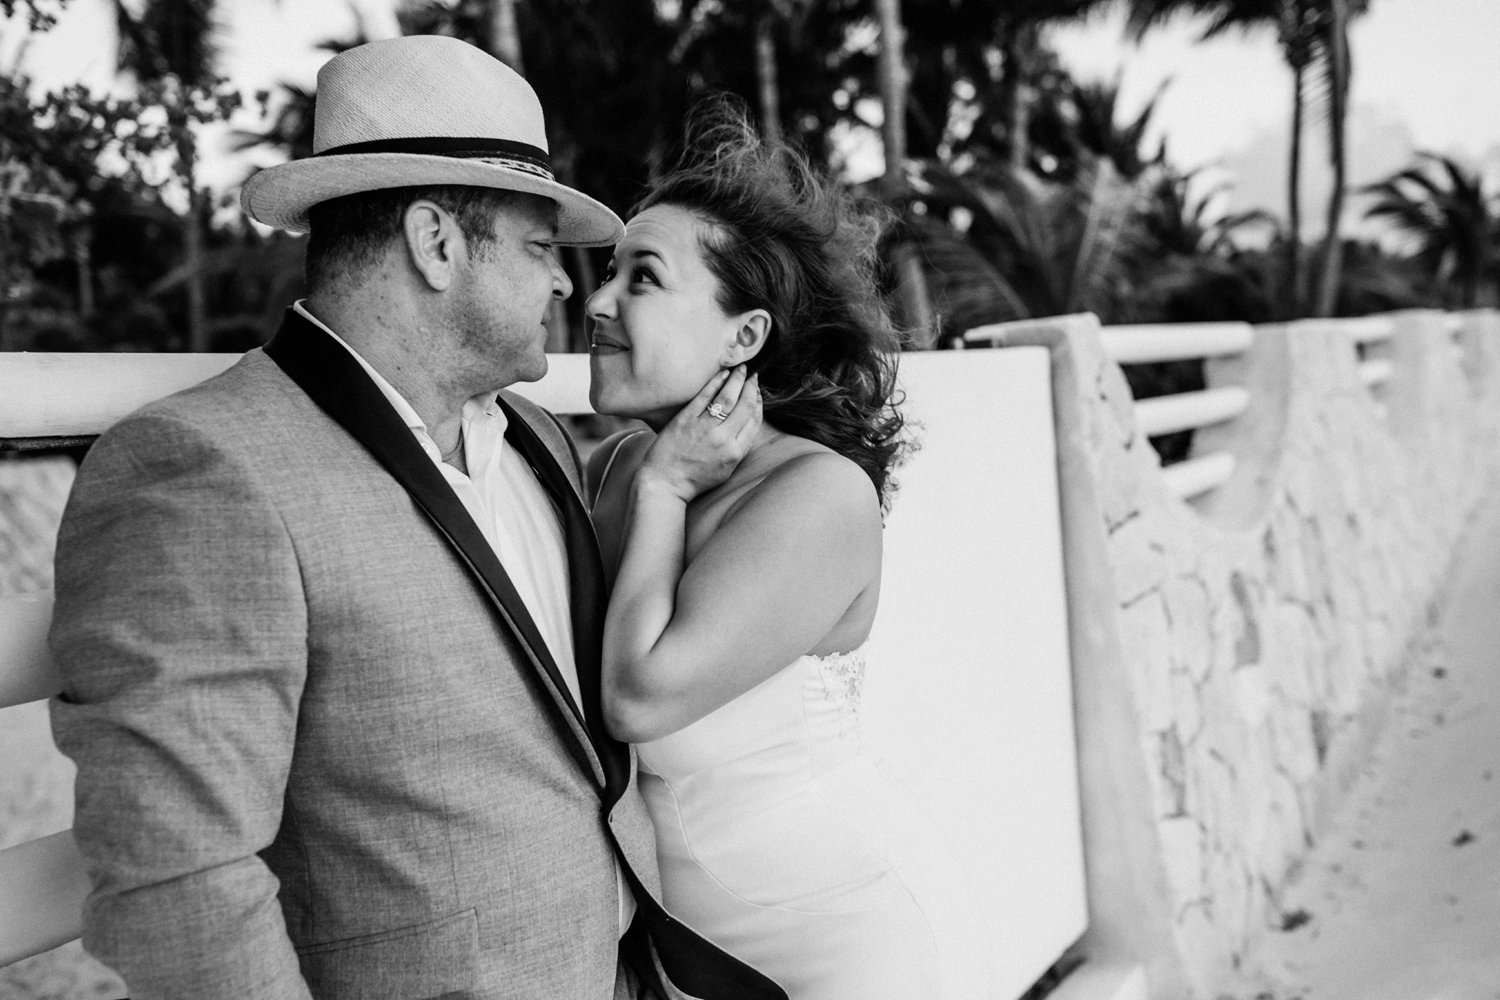  images by feliciathephotographer.com | destination wedding photographer | mexico | tropical | fiji | venue | azul beach resort | riviera maya | sunrise portraits | walking by the ocean | black and white | bride and groom | romantic | whimsical | long gown | grey suit | 